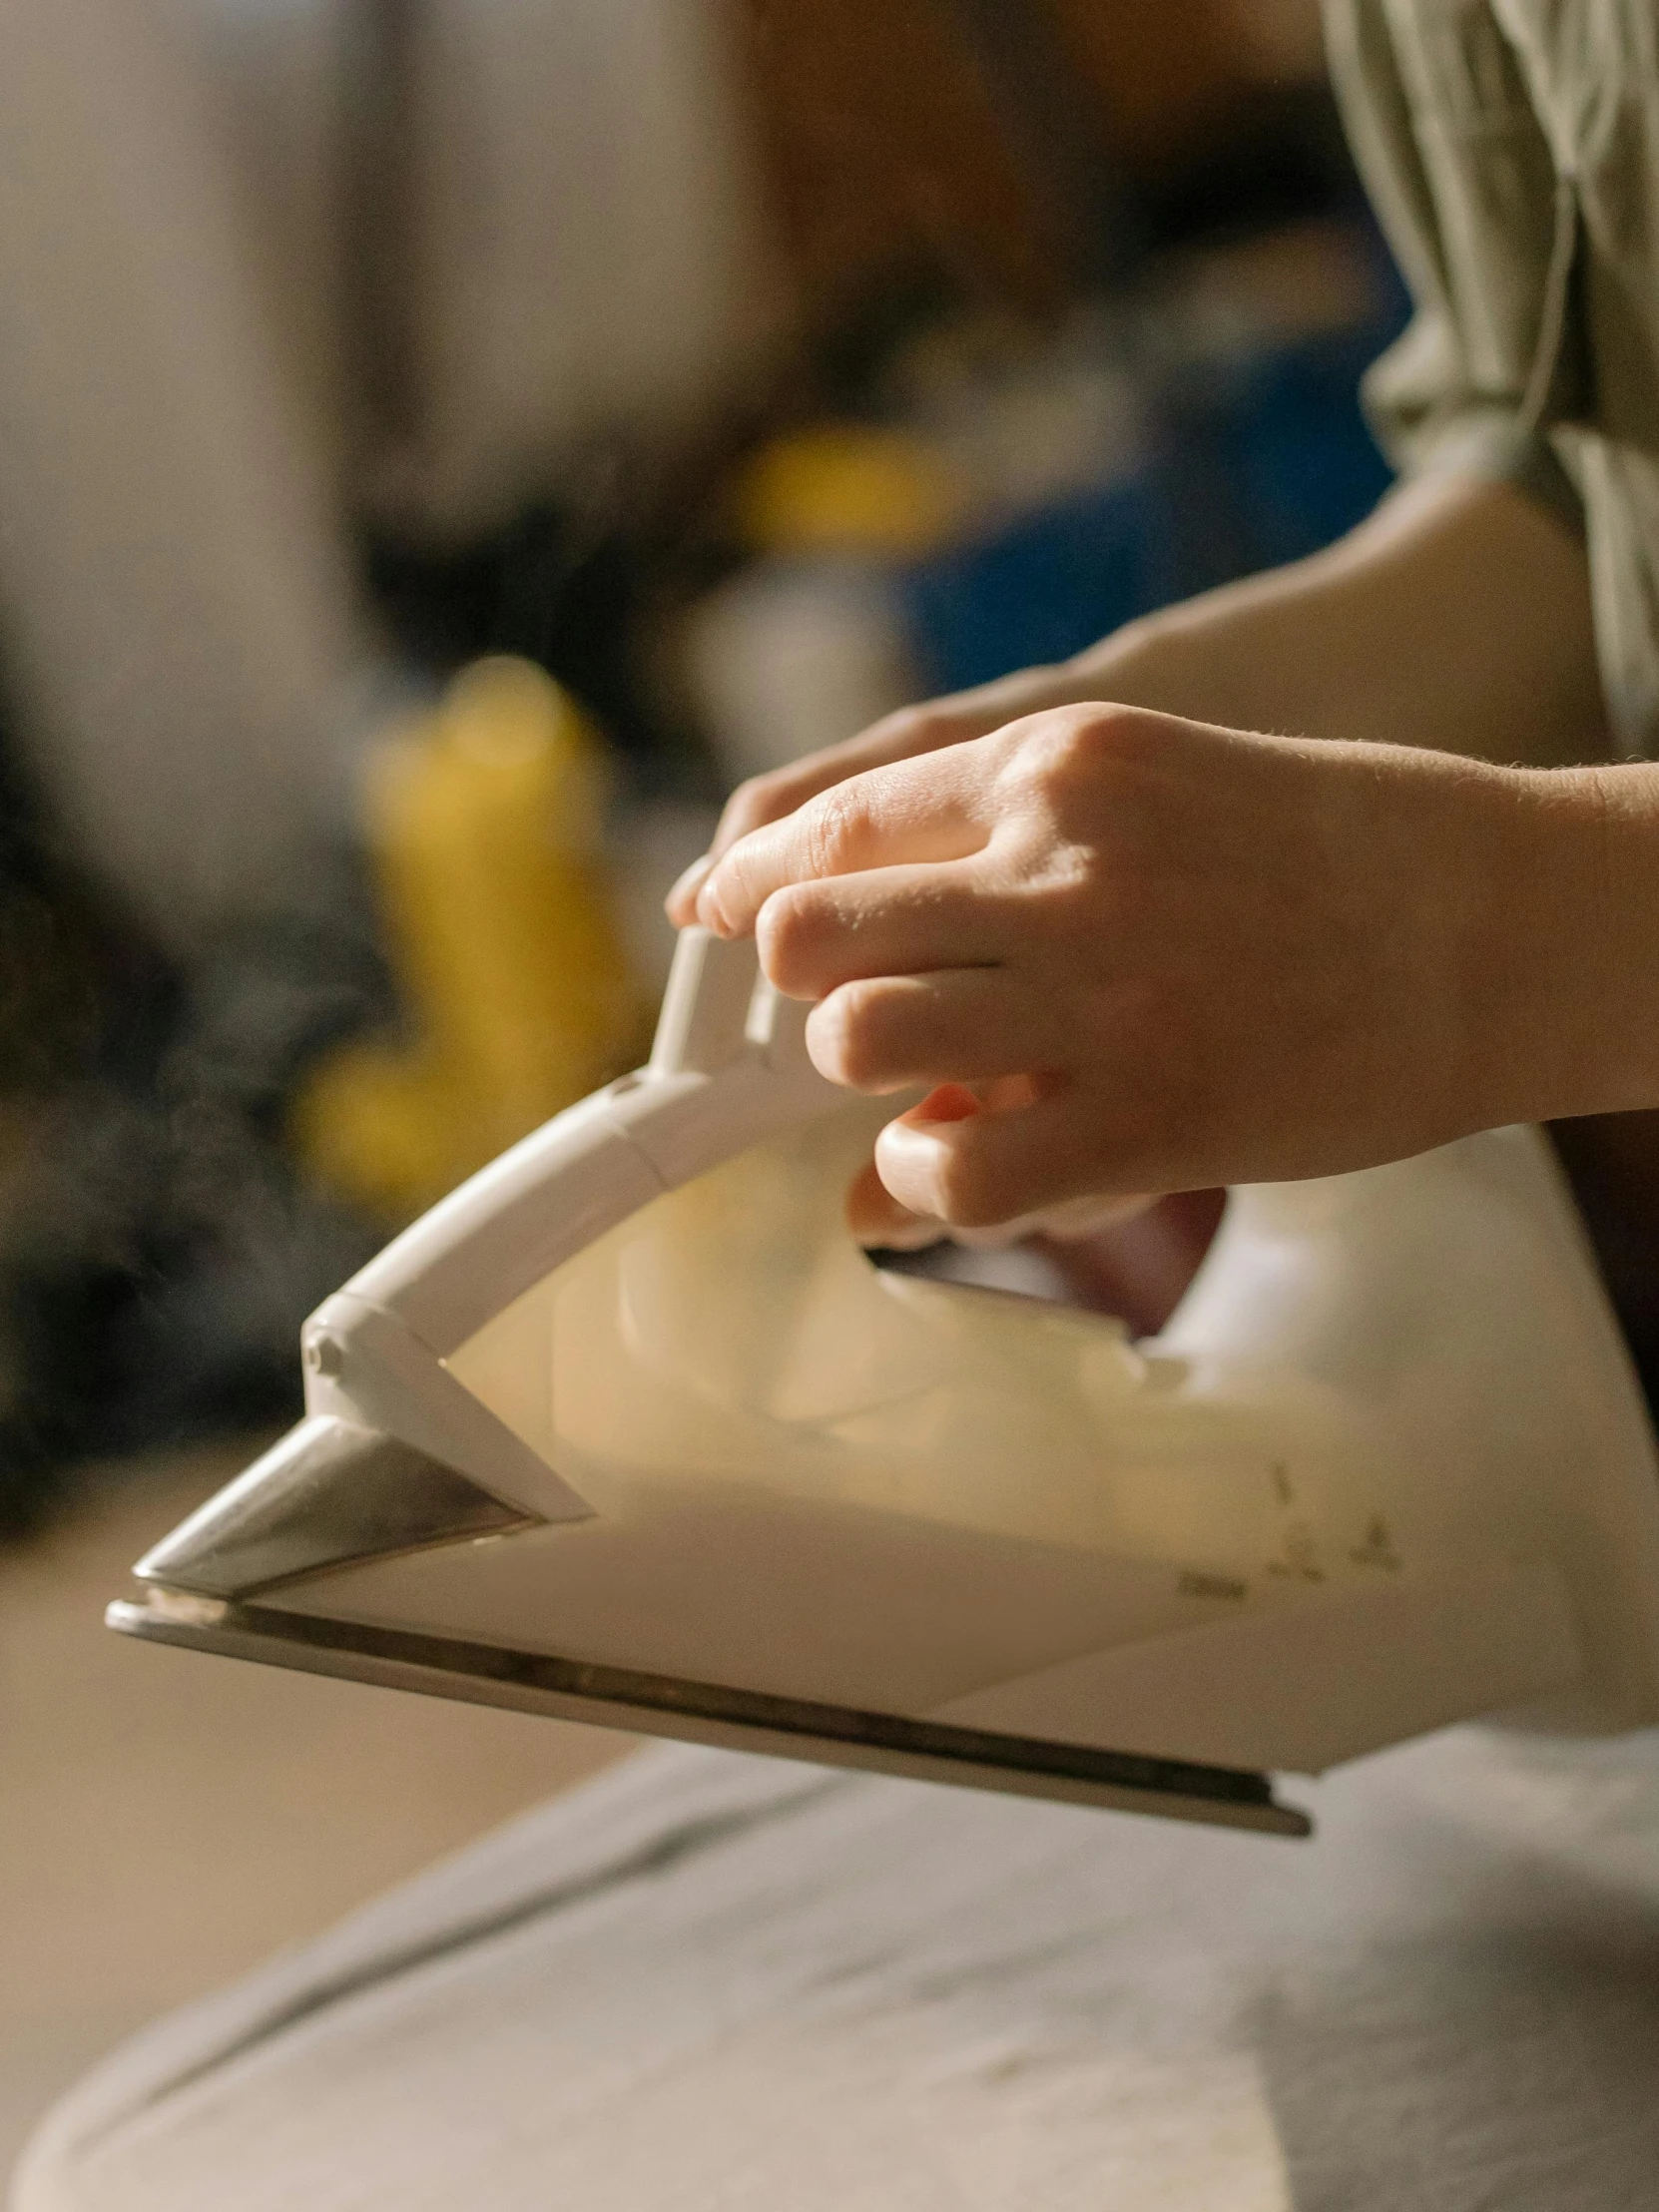 a person ironing something on an ironing board, off-white plated armor, profile image, ignant, thumbnail